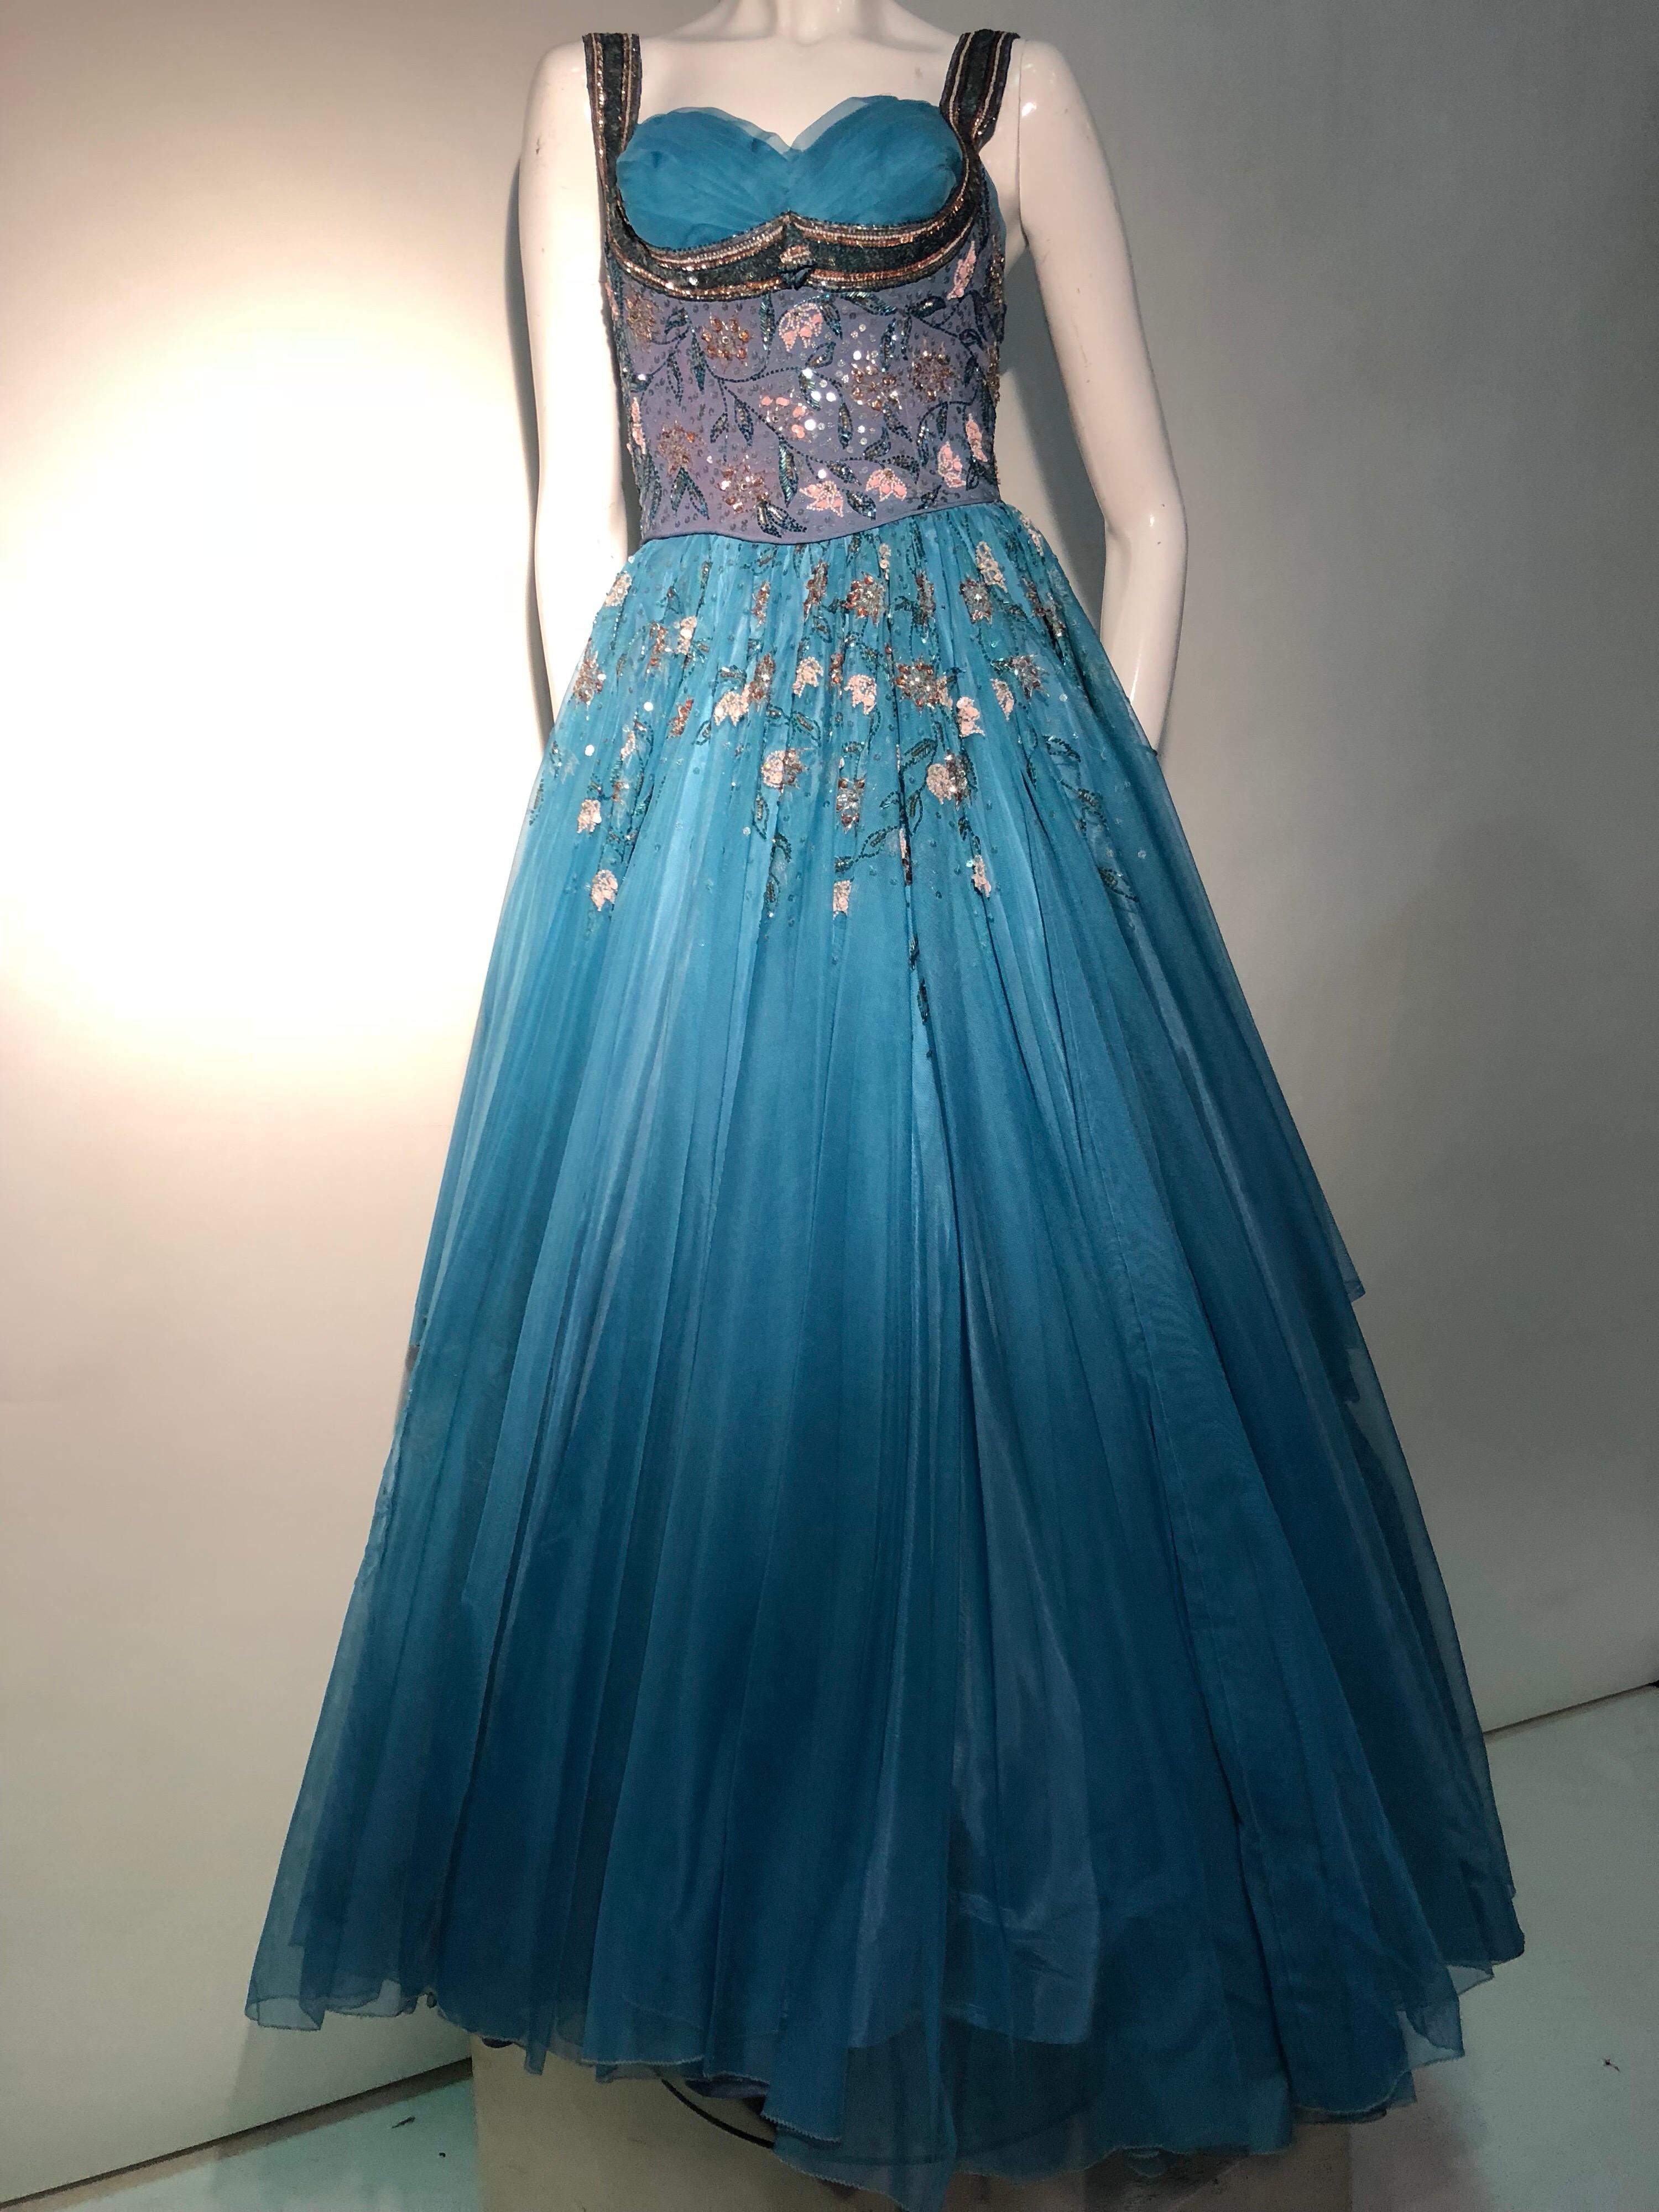 1950s MGM Mme. Etoile by Irene Sharaff Couture Ball Gown in Deep Teal Silk For Sale 1